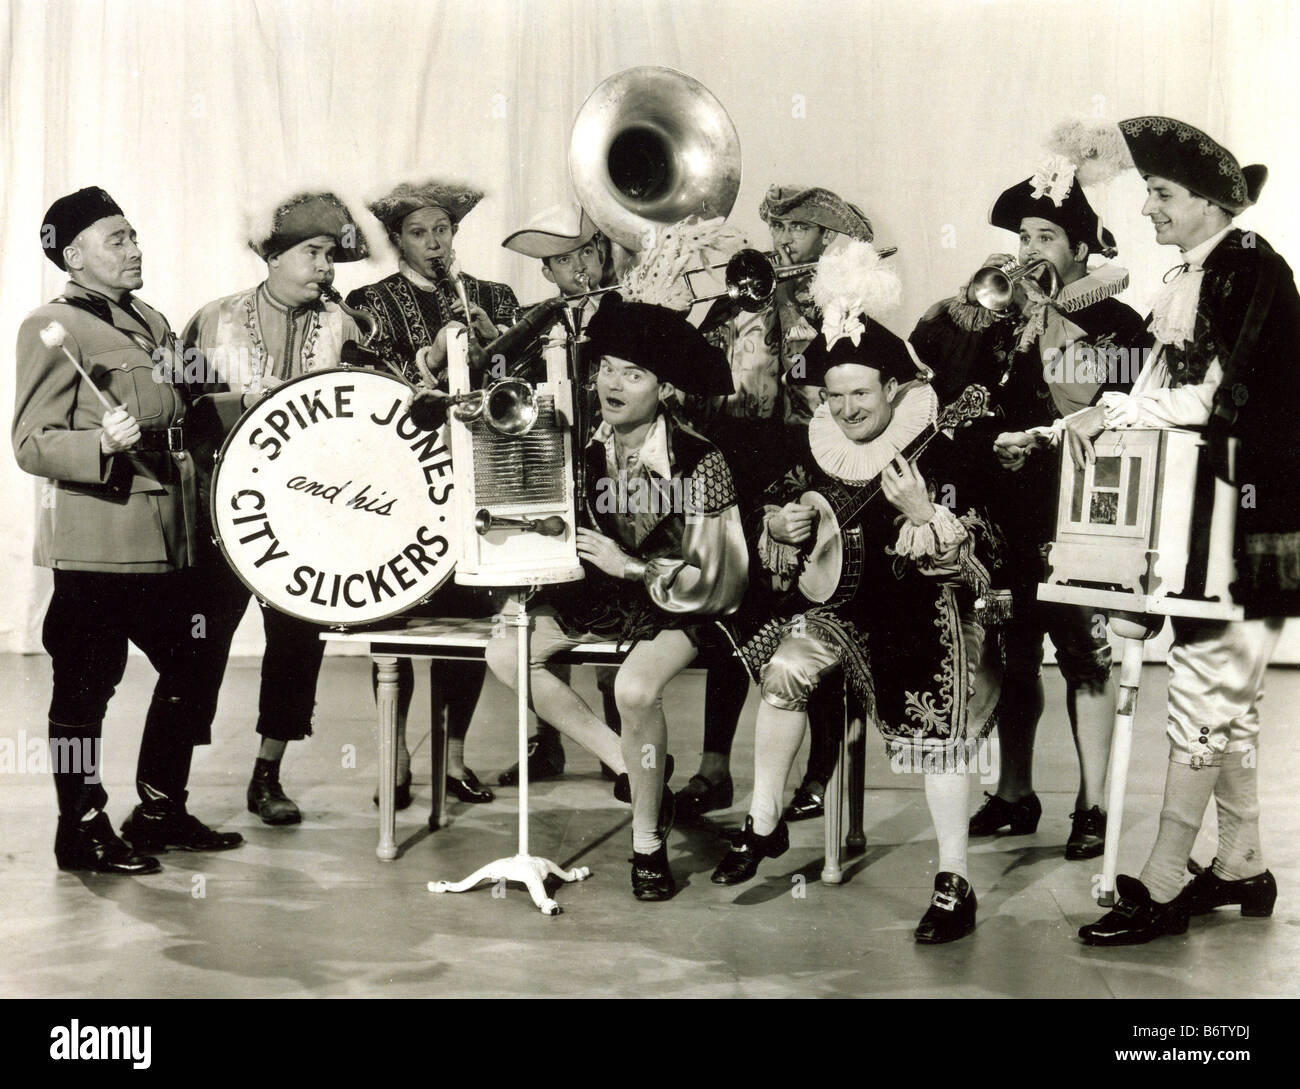 SPIKE JONES AND HIS CITY SLICKERS  US 30s band Stock Photo